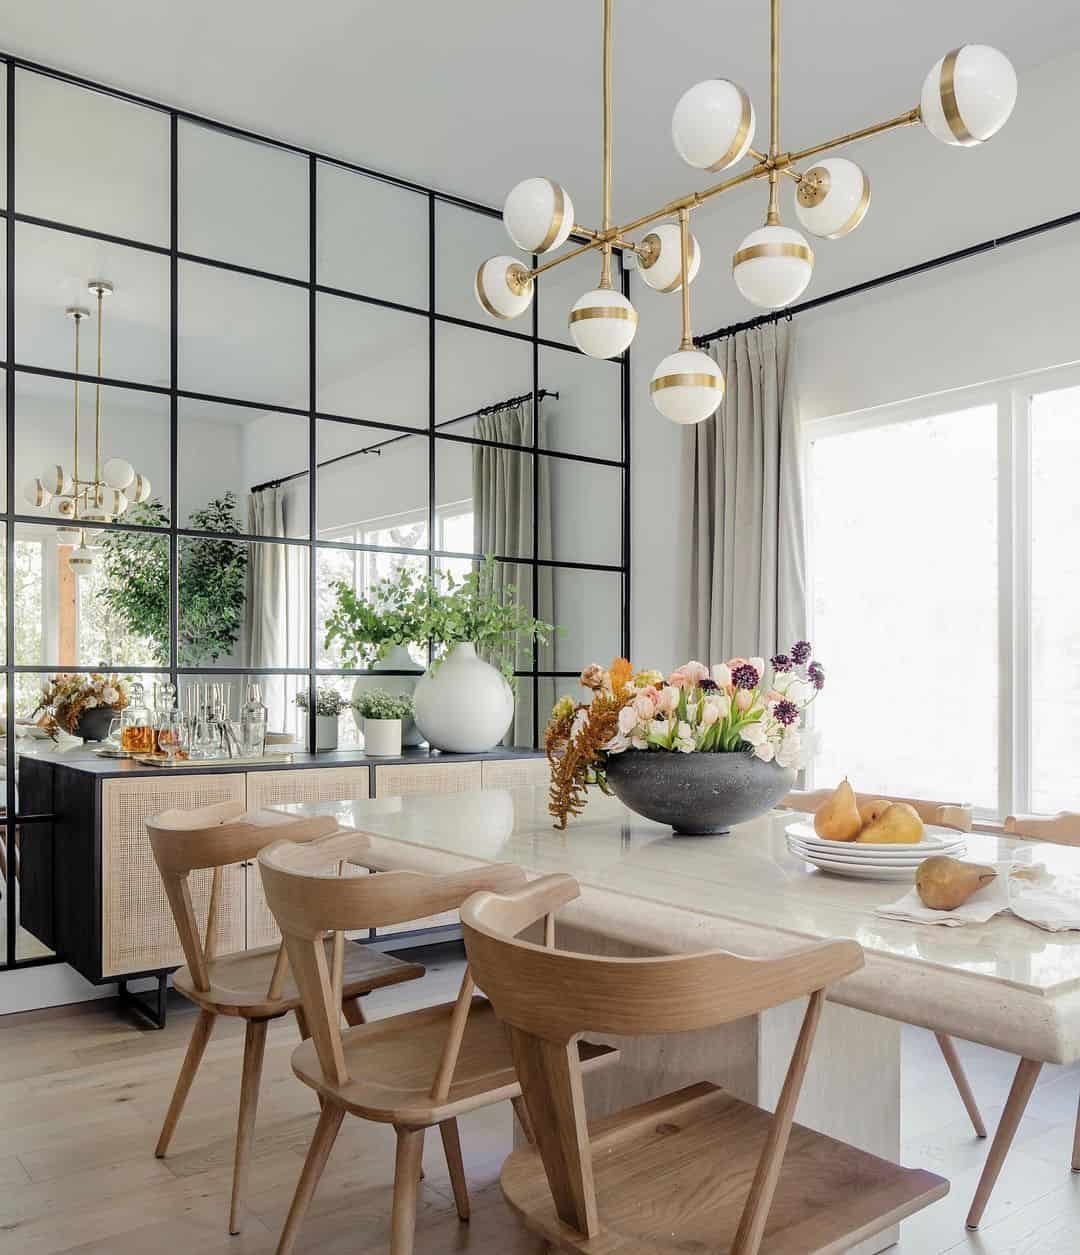 27 Luxurious Dining Room Gold Chandelier Ideas You’ll Love